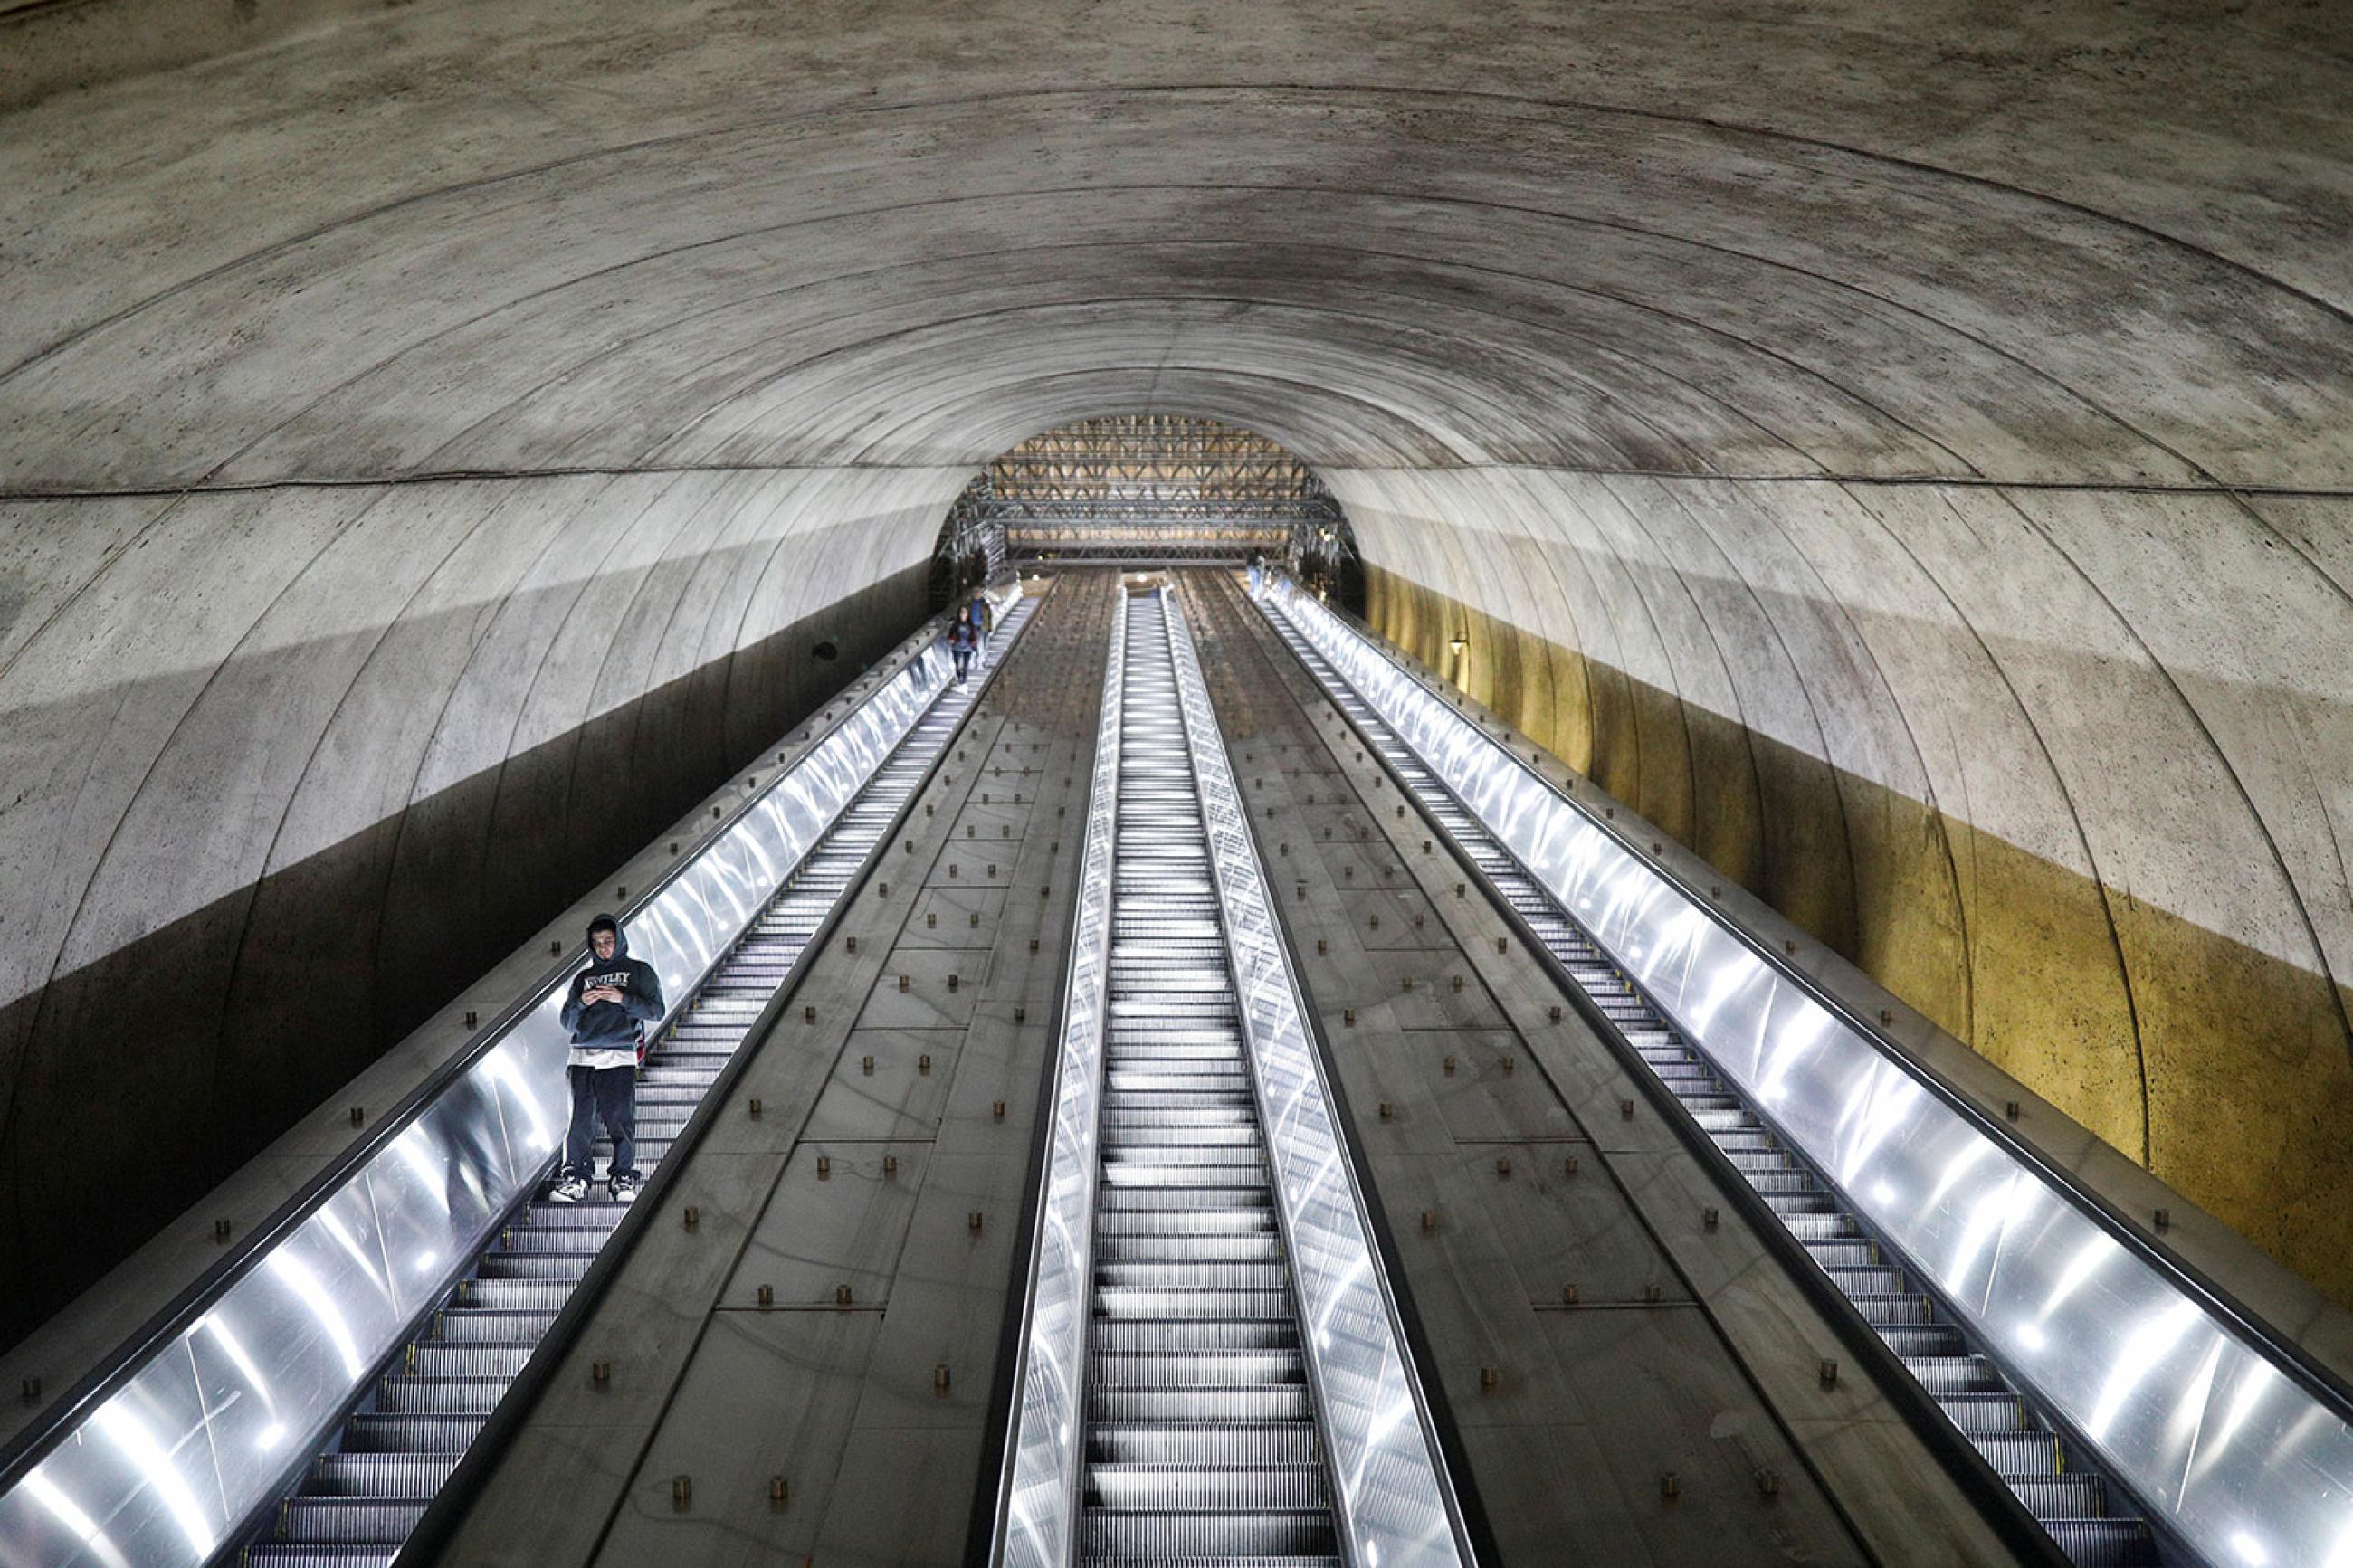 A usually bustling Metro station in Bethesda, Maryland nearly empty at rush hour last week, when Governor Larry Hogan ordered the shutdown of all bars and restaurants in the state due to coronavirus. The picture shows a long escalator tube almost empty. REUTERS/Tom Brenner 